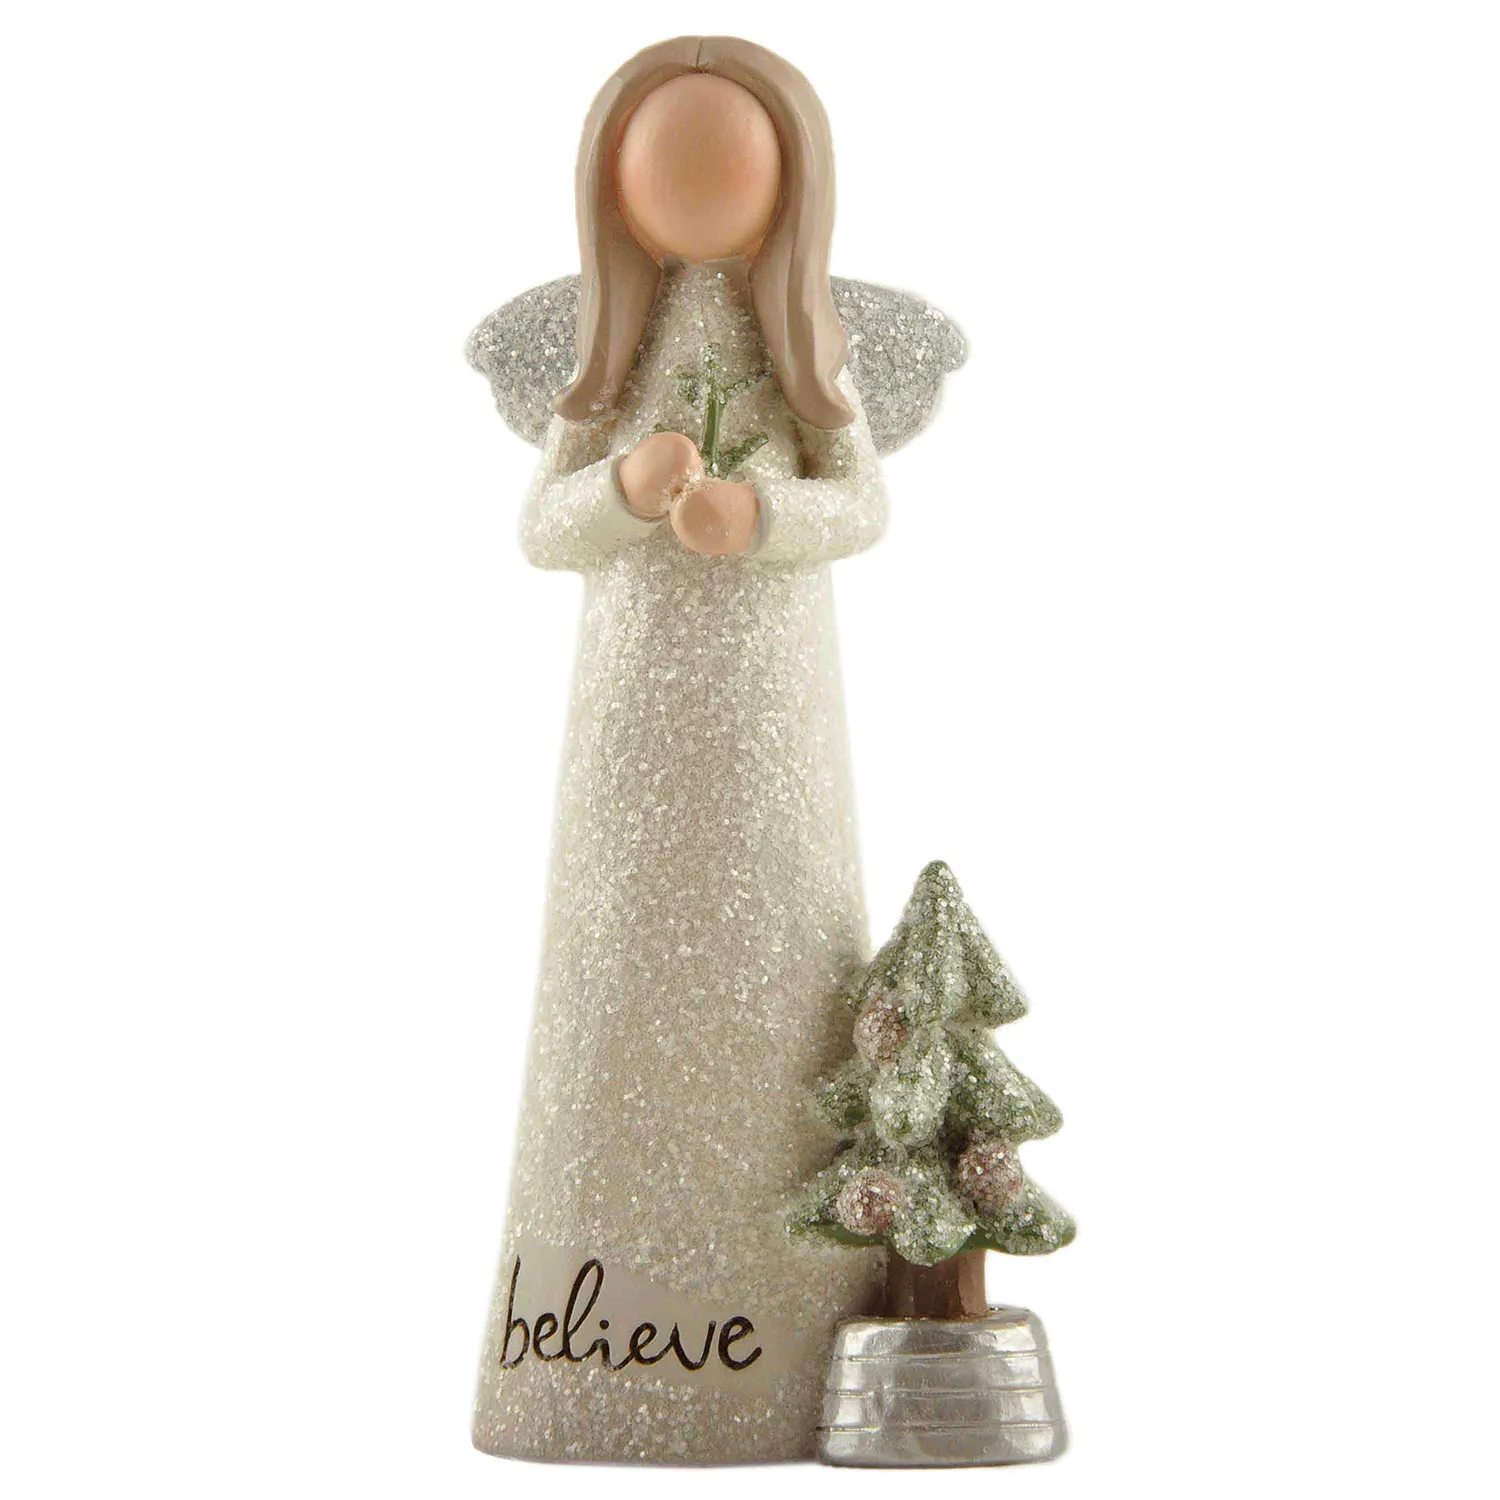 Believe in the Magic: A Graceful Resin Angel with a Twinkling Christmas Tree, Ushering in a Season of Wonder and Peaceful Celebrations 238-13928